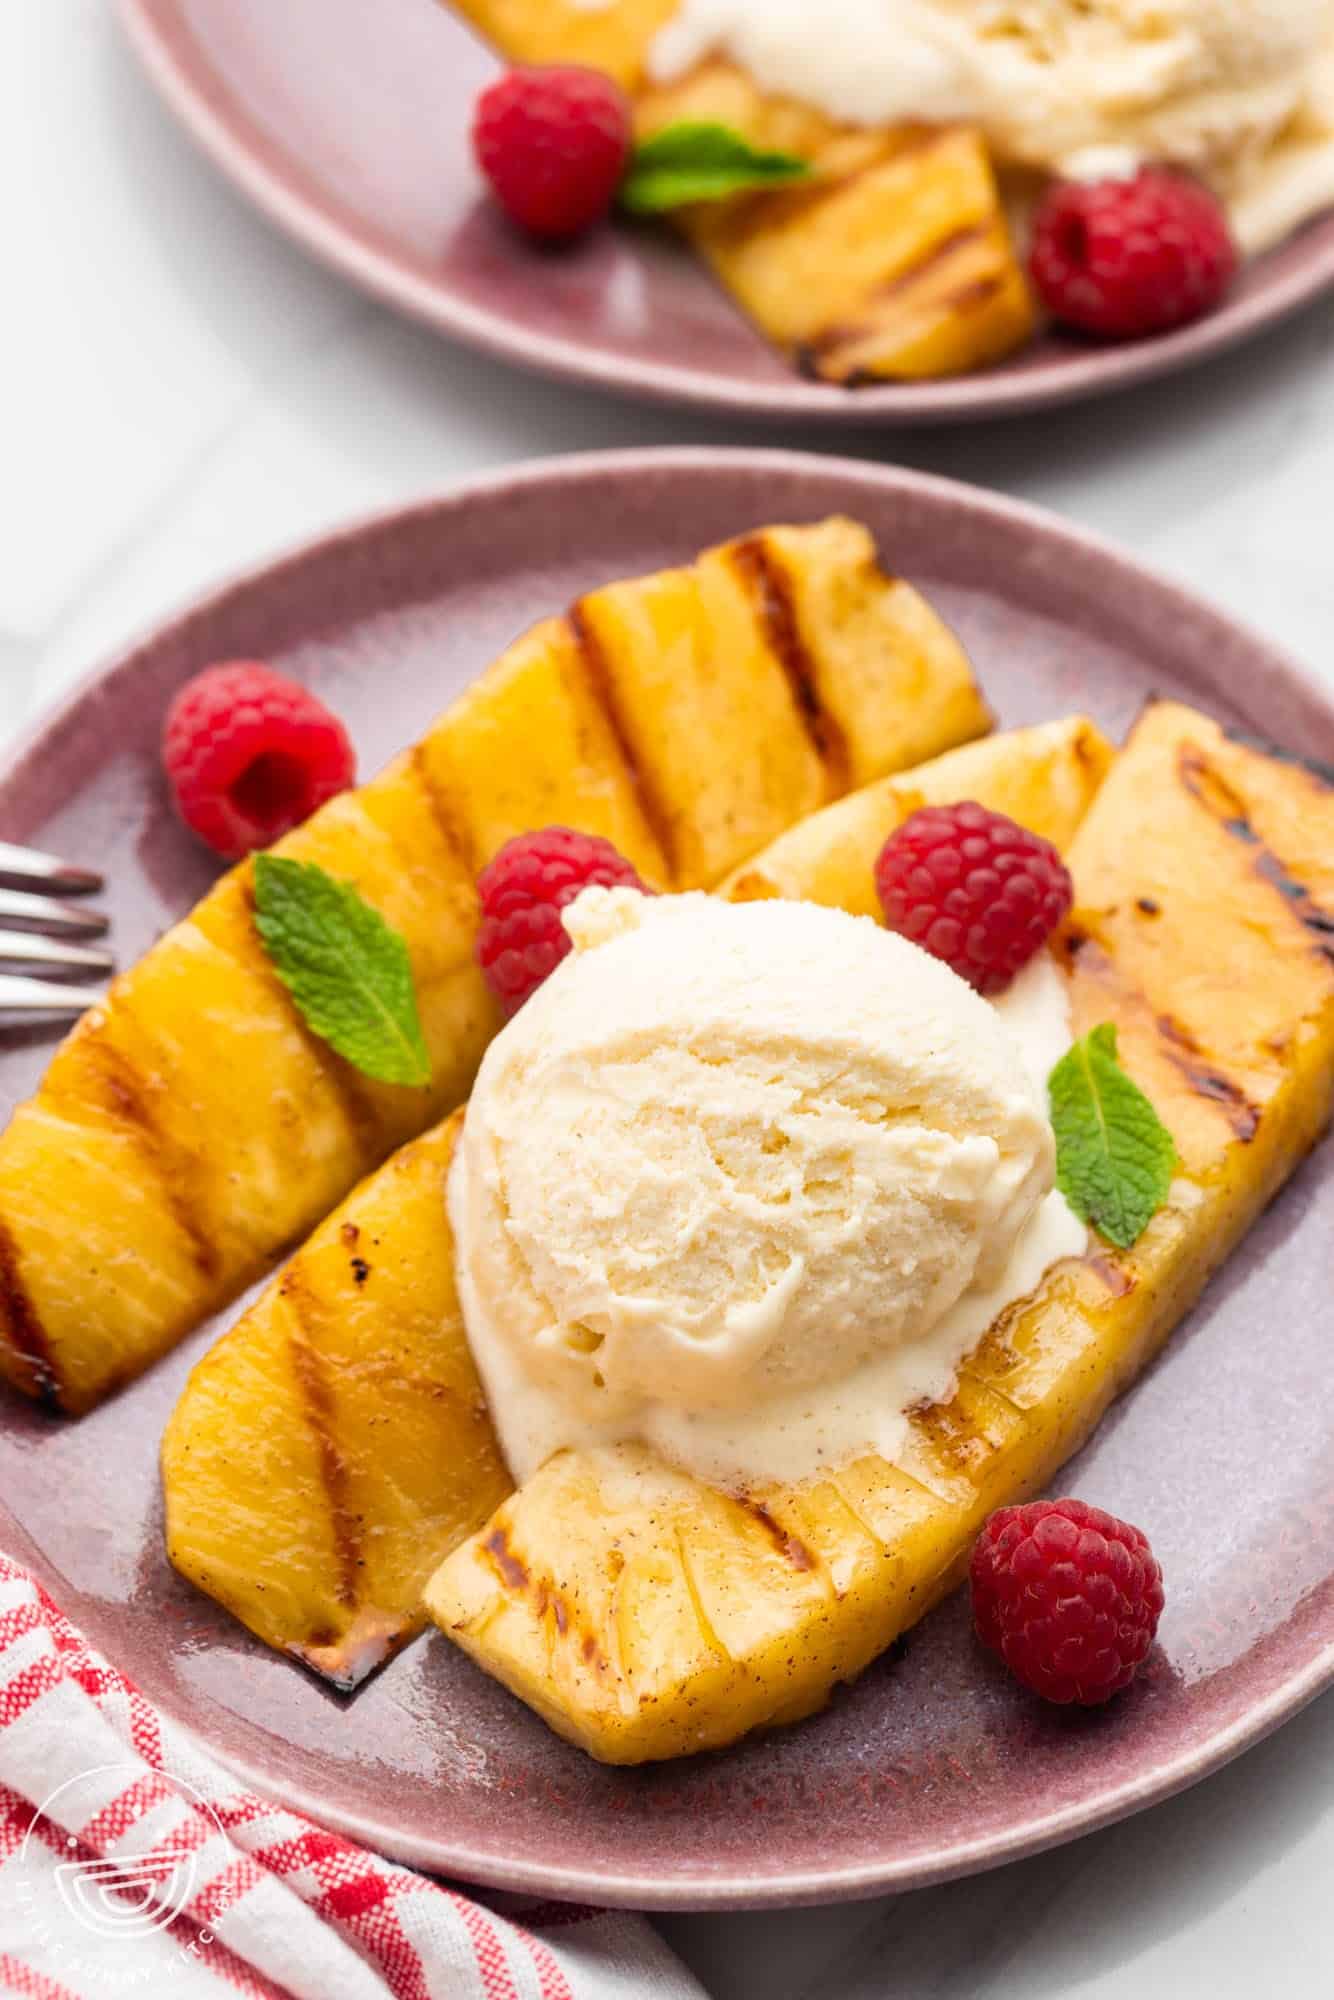 Grilled pineapple spears served on a pink plate with a scoop of ice cream and fresh raspberries and mint leaves